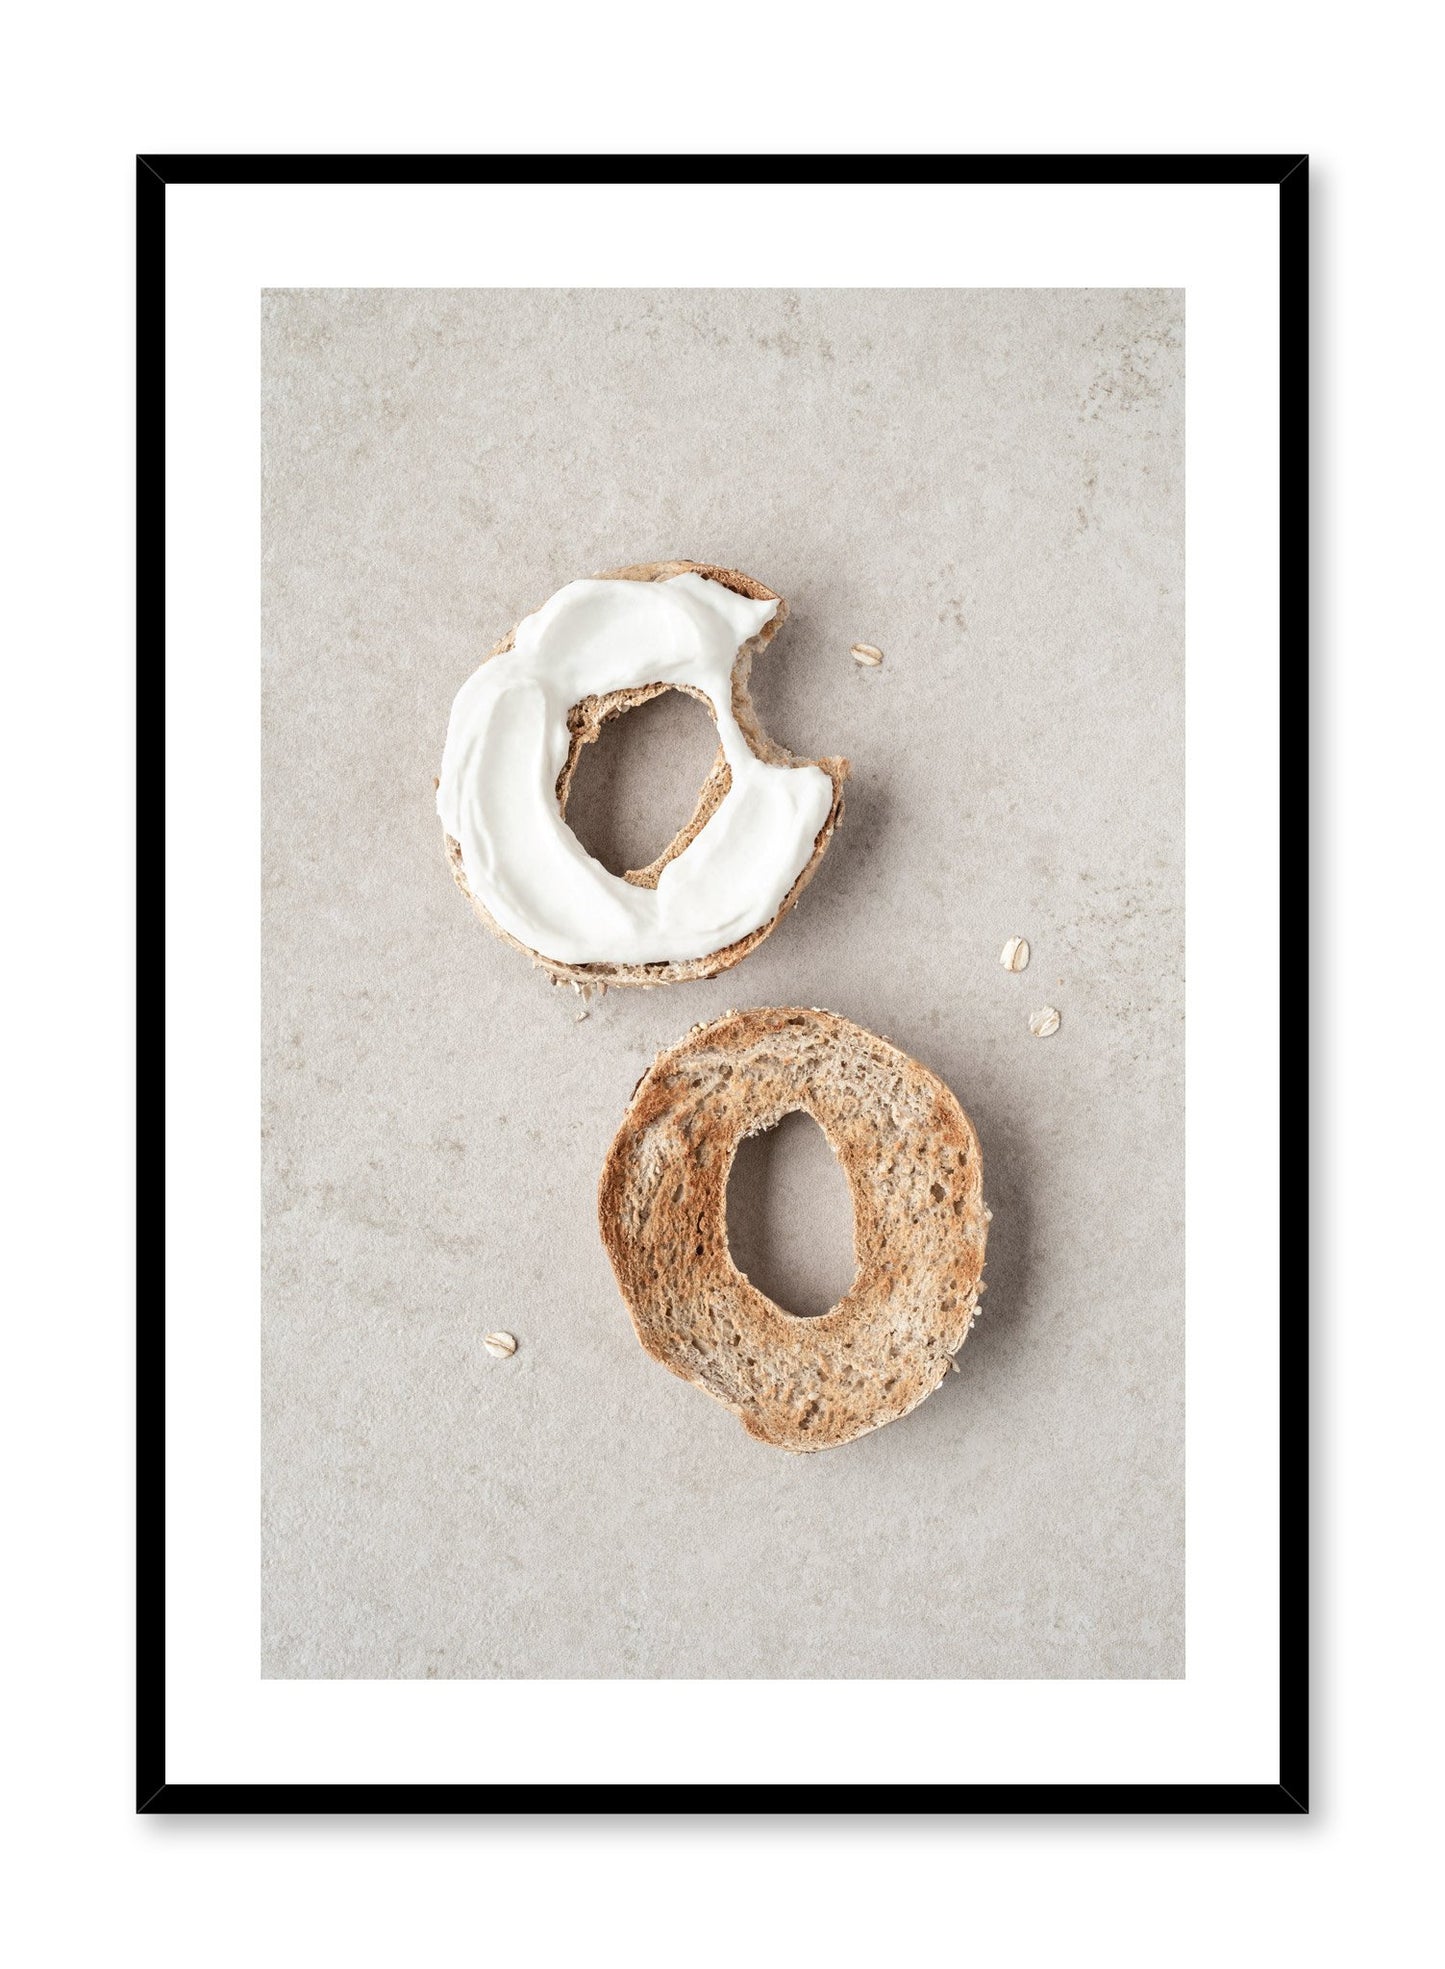 Scandinavian poster by Opposite Wall with Bagel Bite food photography